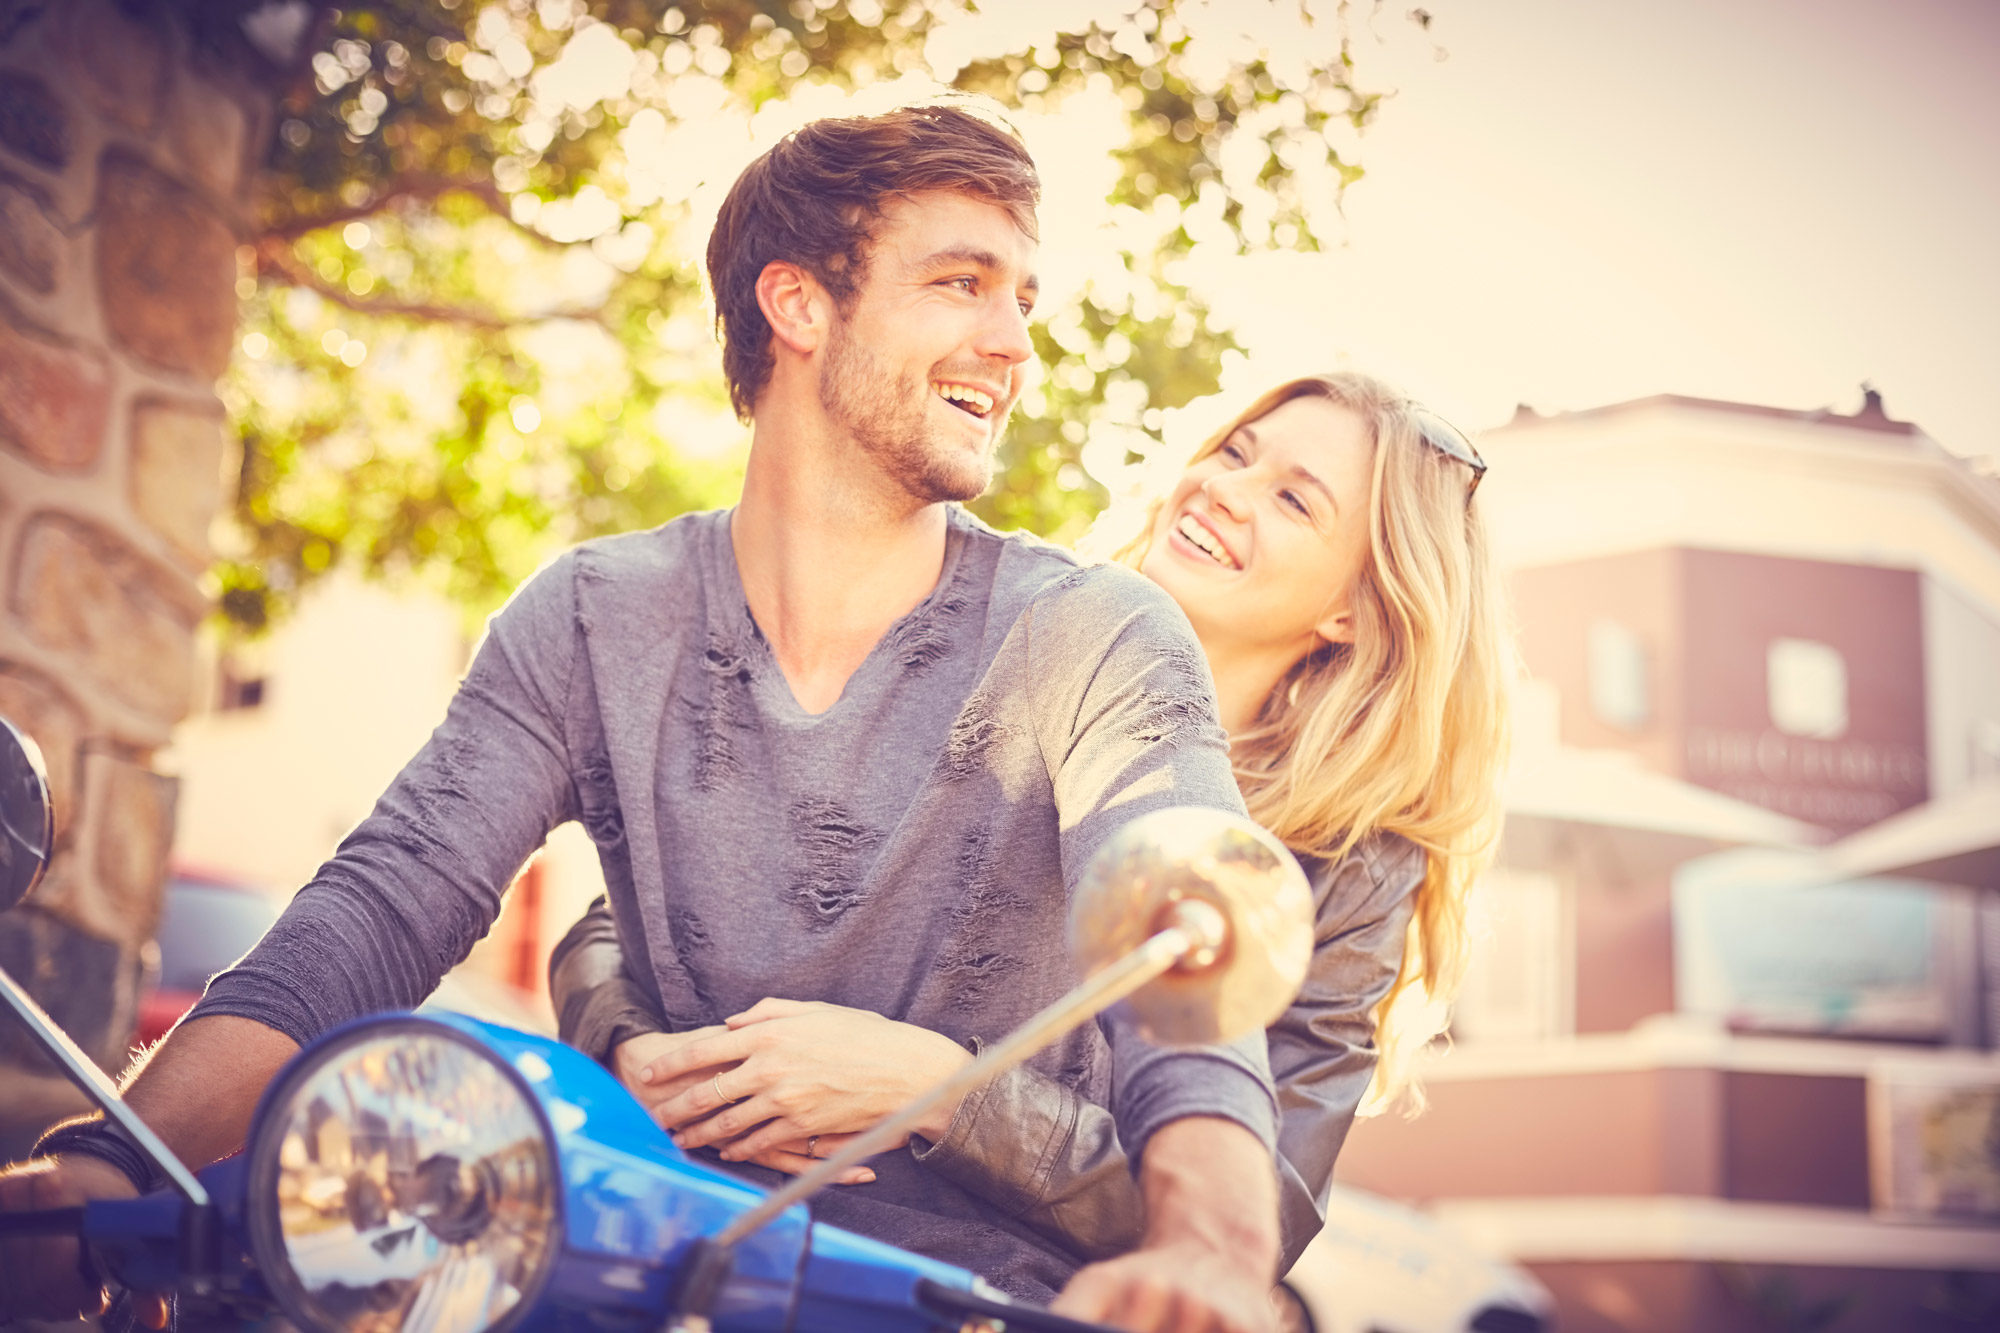 Man and woman smiling on moped